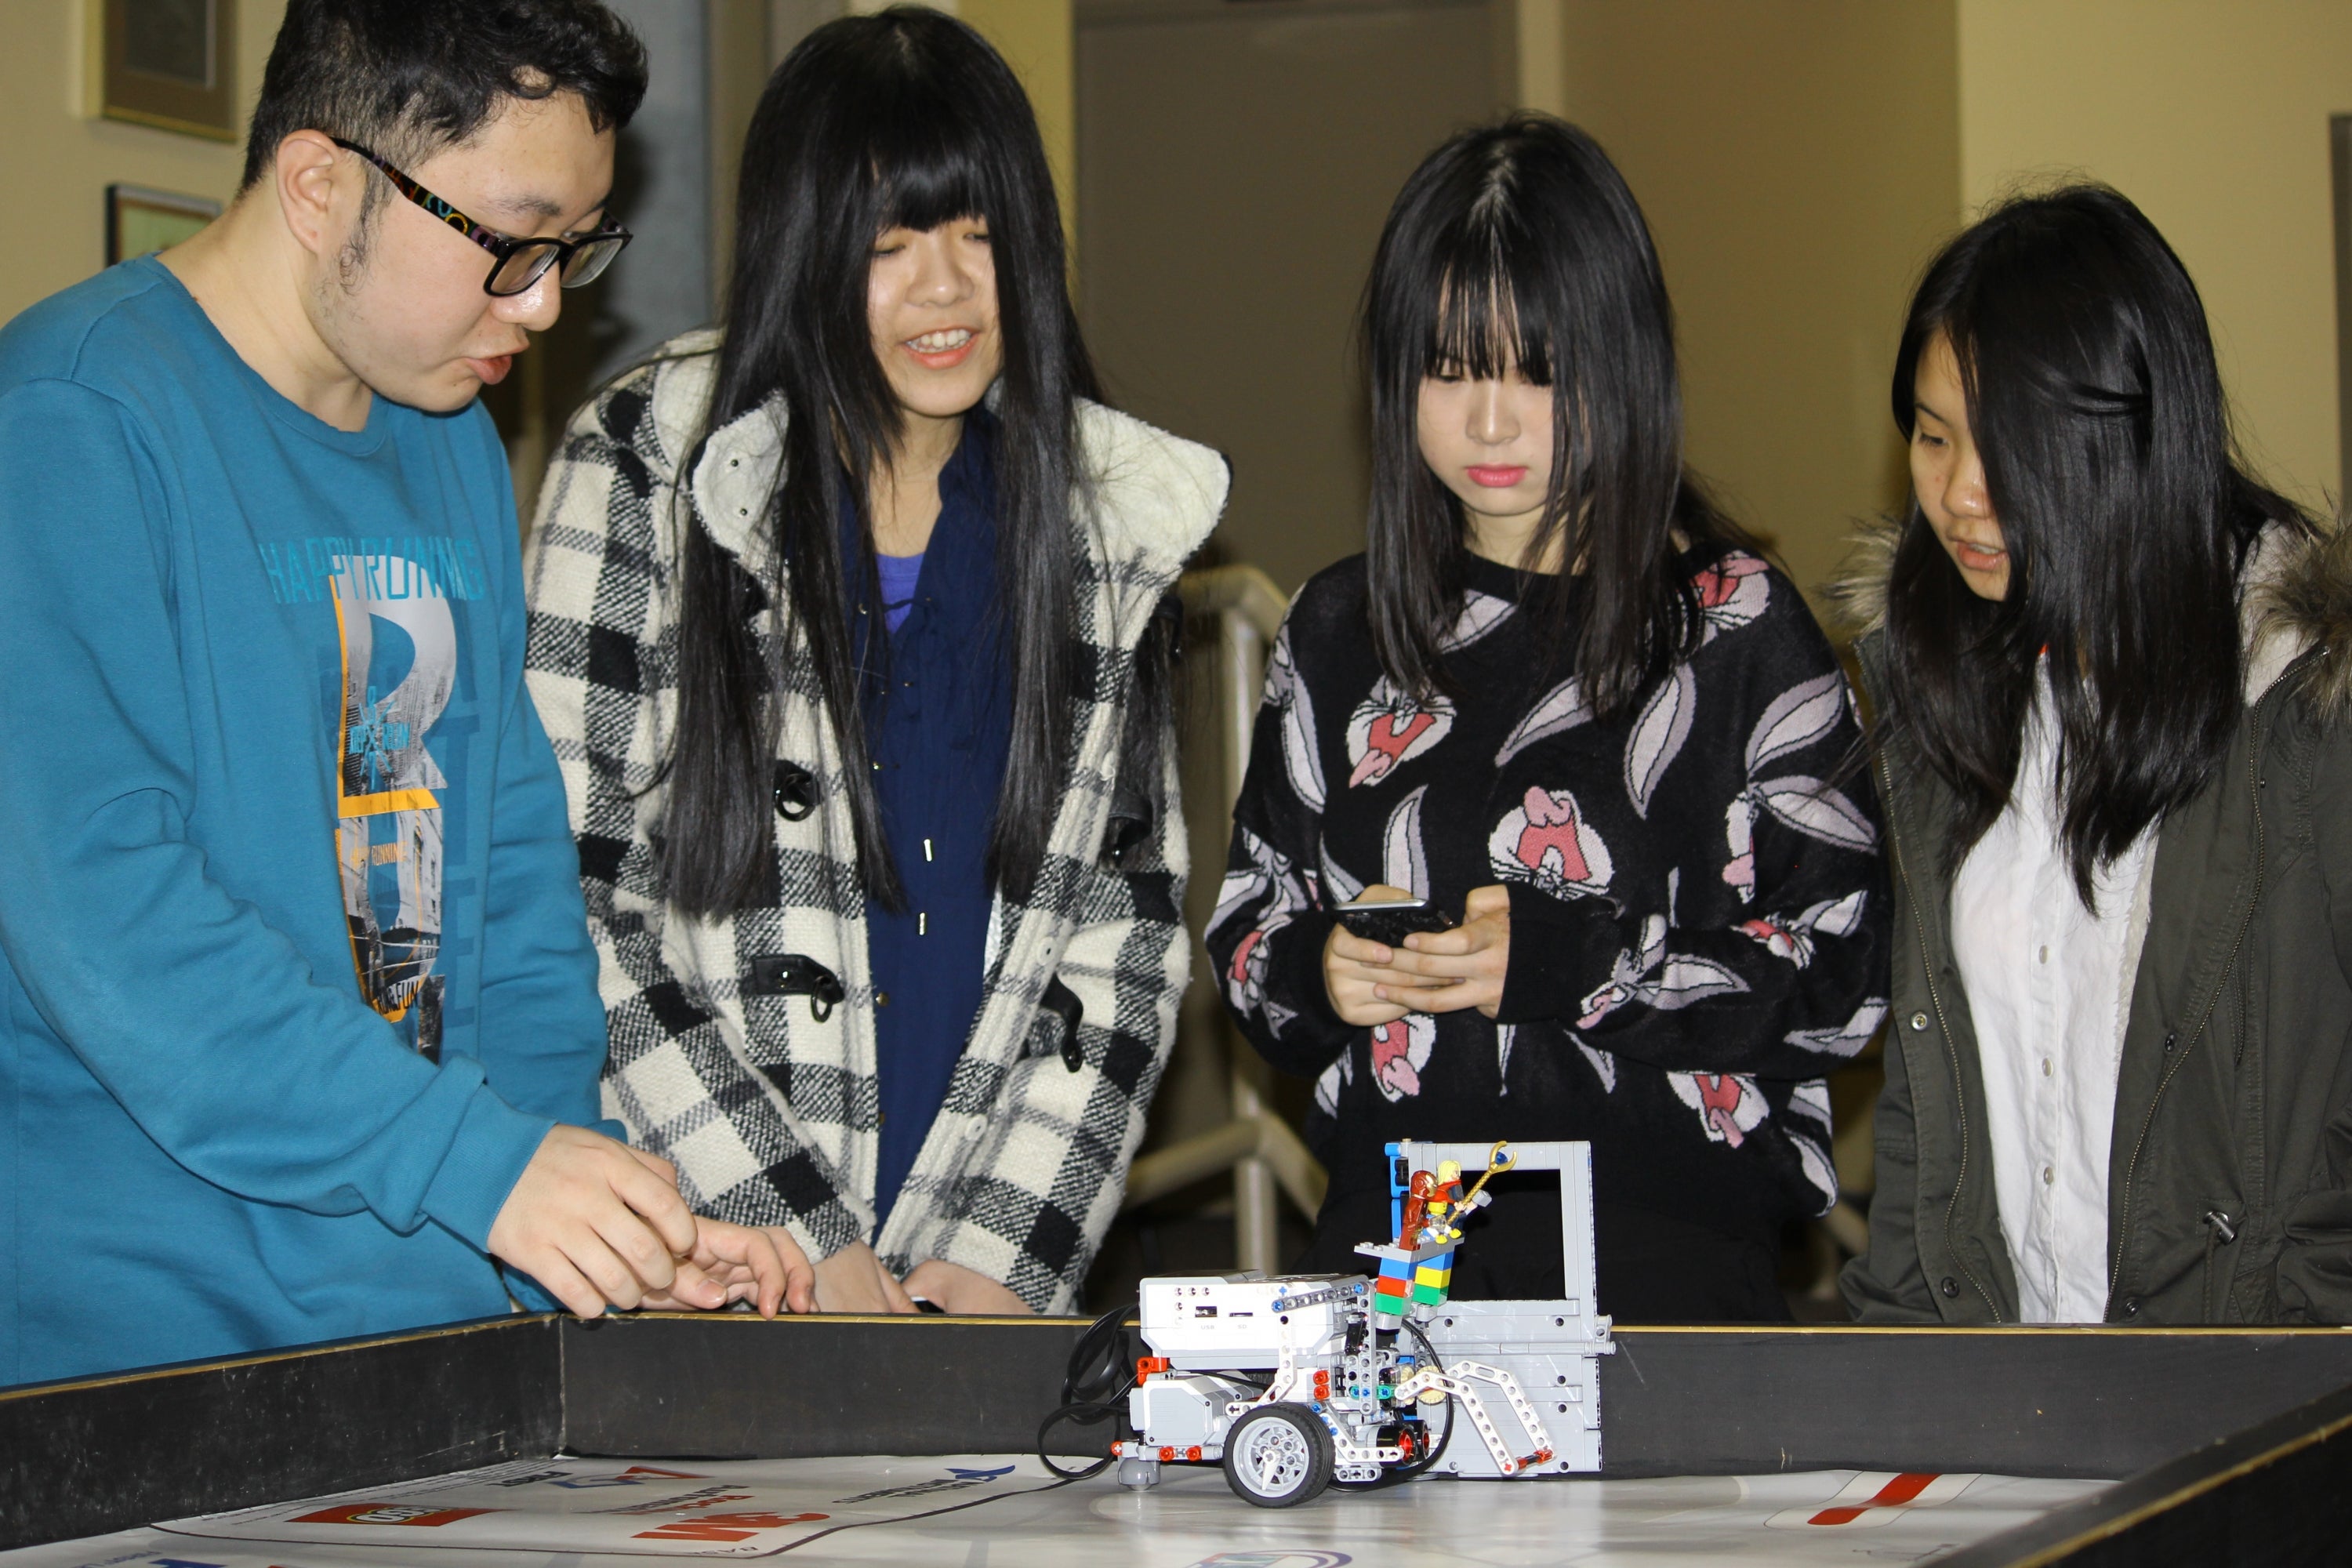 Students participating in a LEGO Robotics challenge